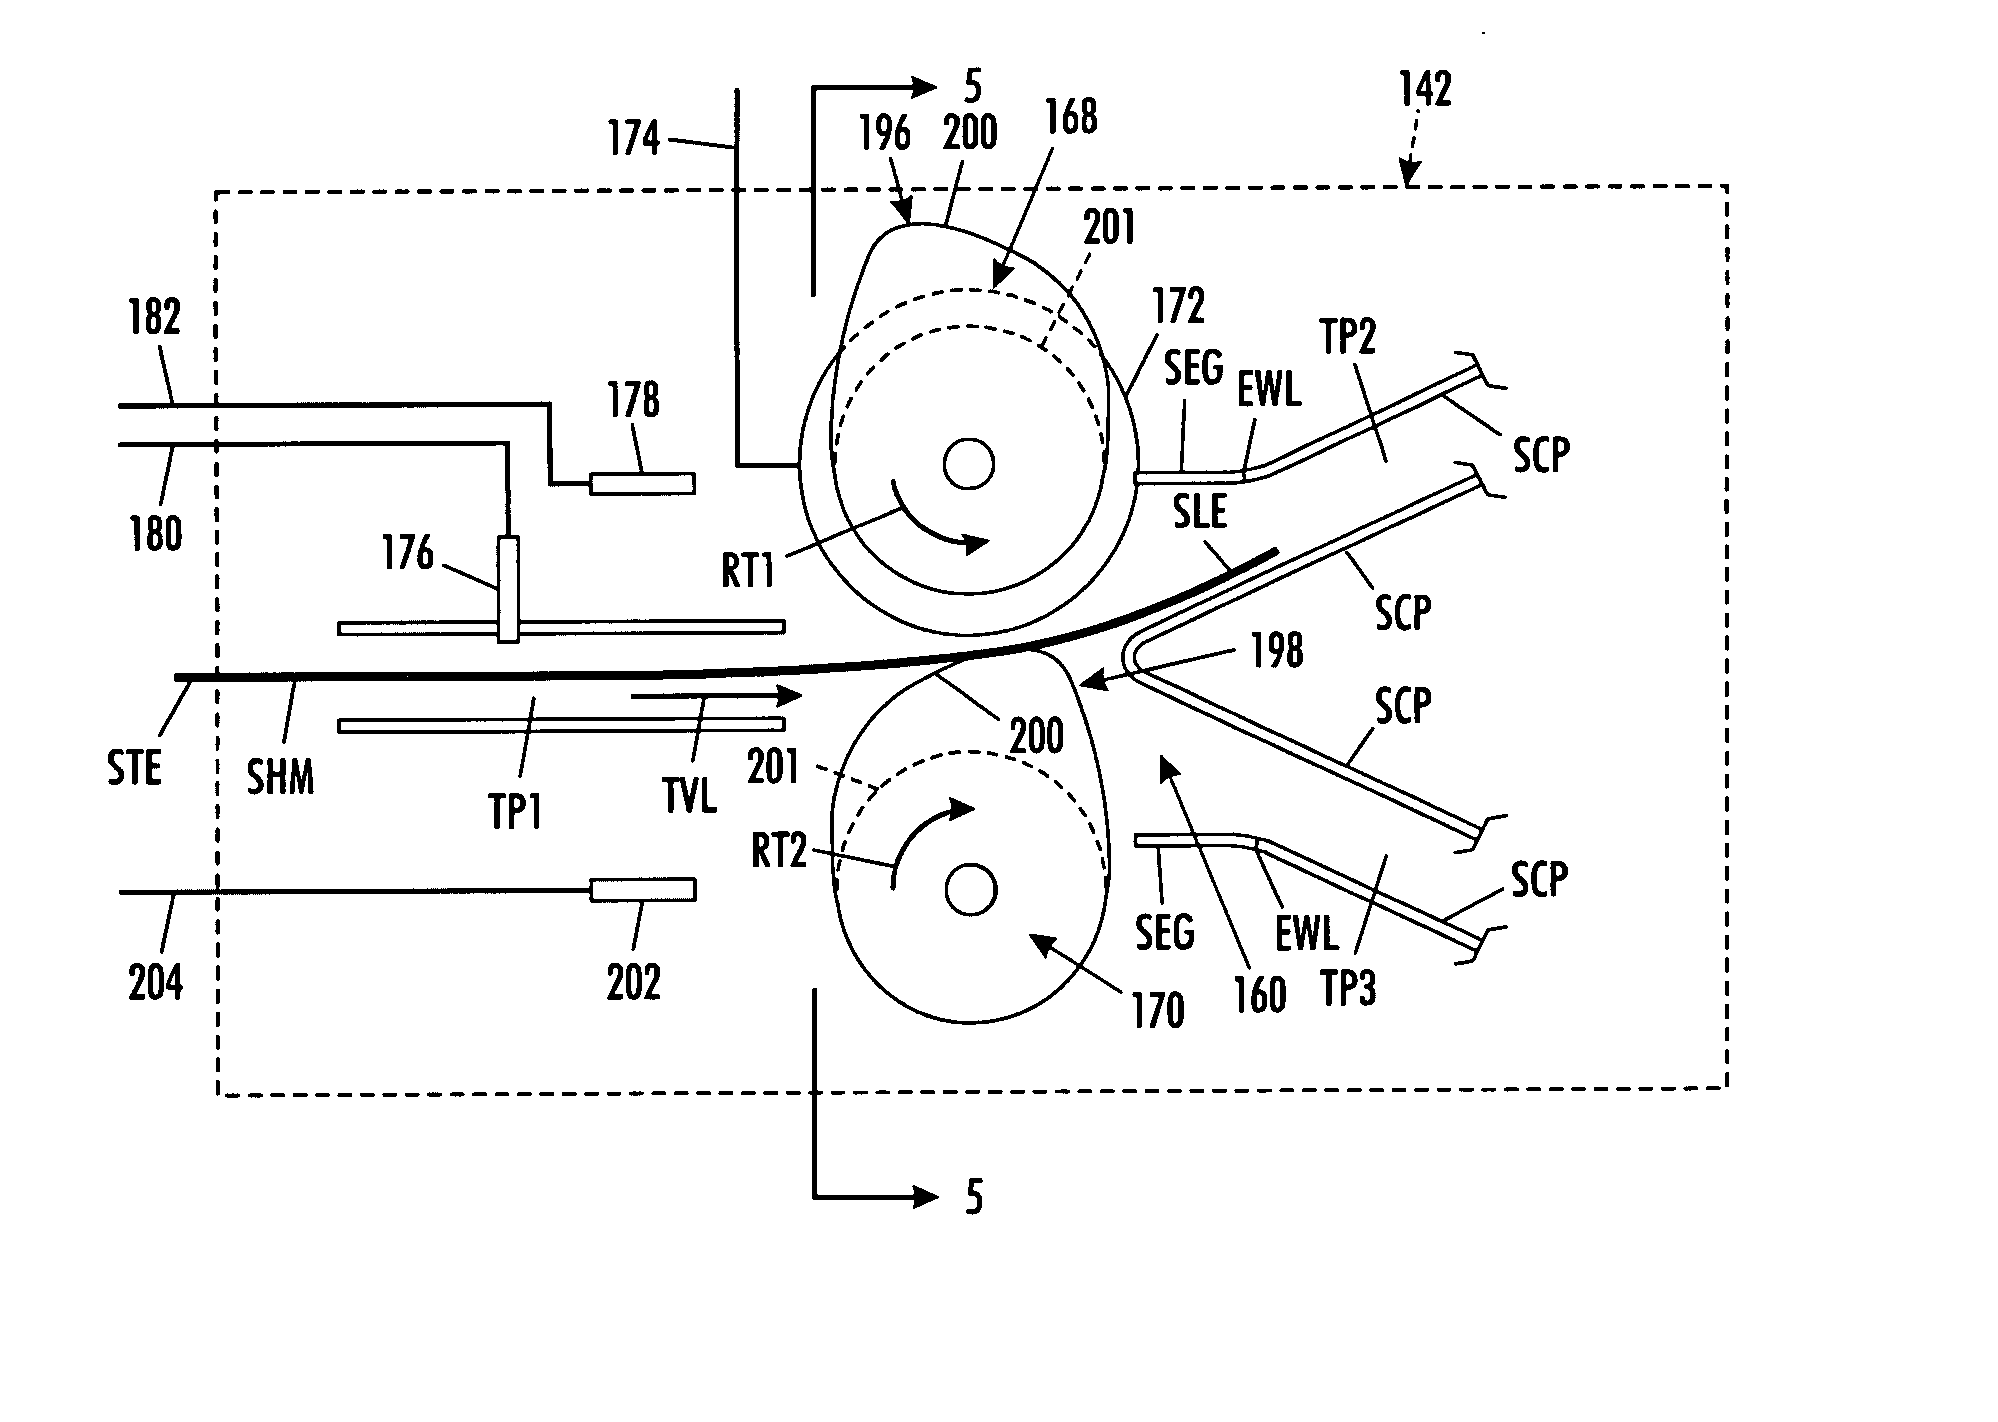 Diverter assembly, printing system and method